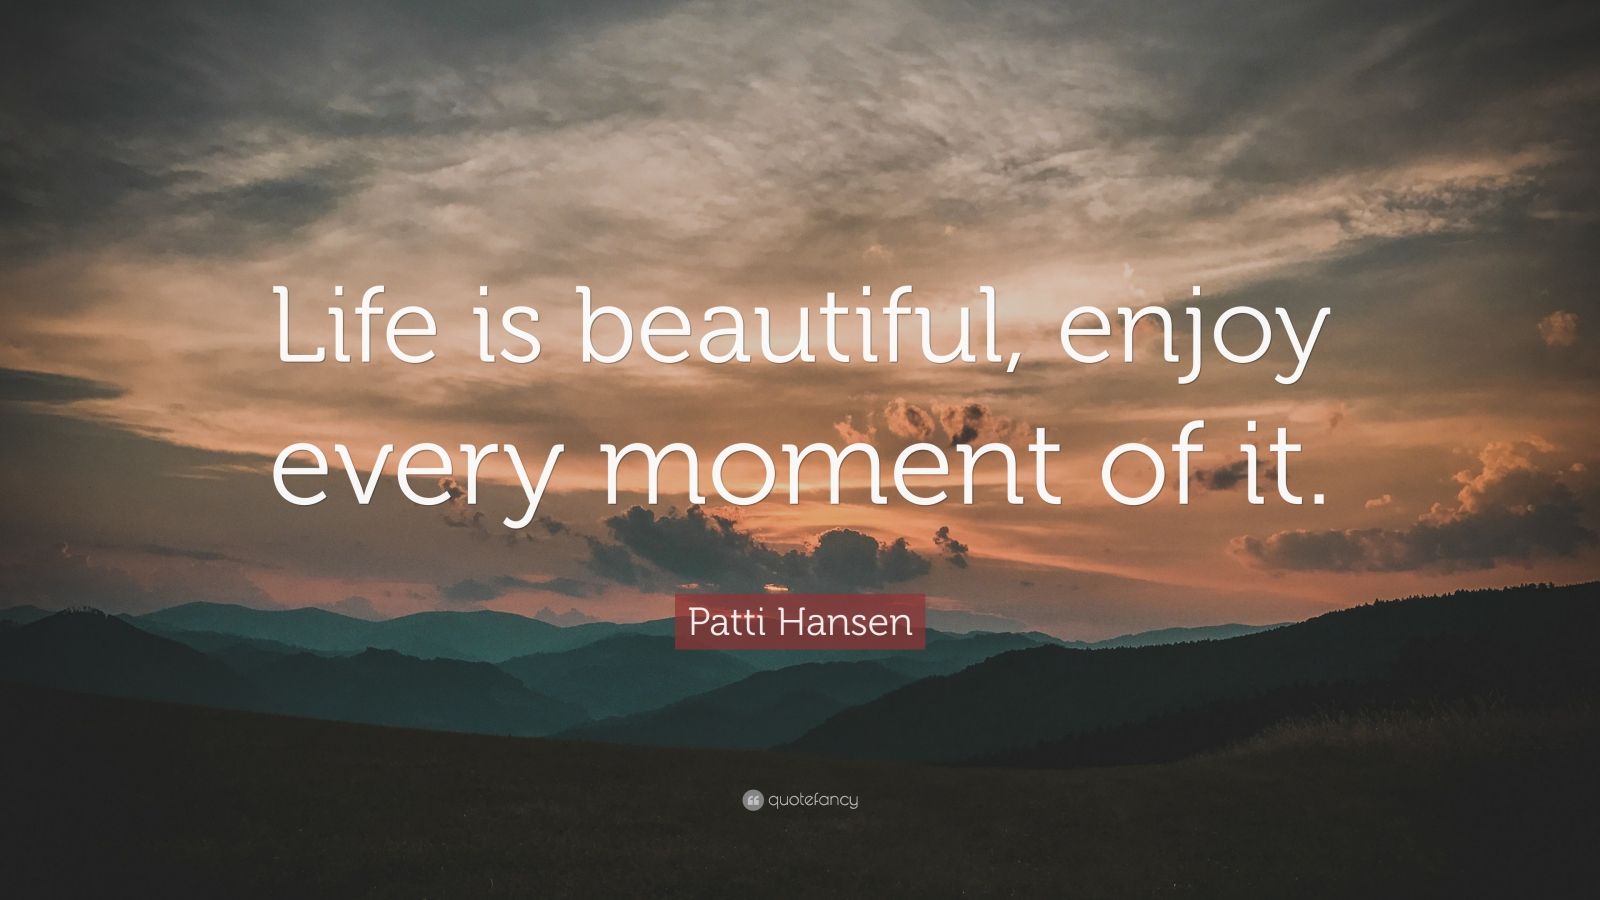 Patti Hansen Quote “life Is Beautiful Enjoy Every Moment Of It” 9 Wallpapers Quotefancy 